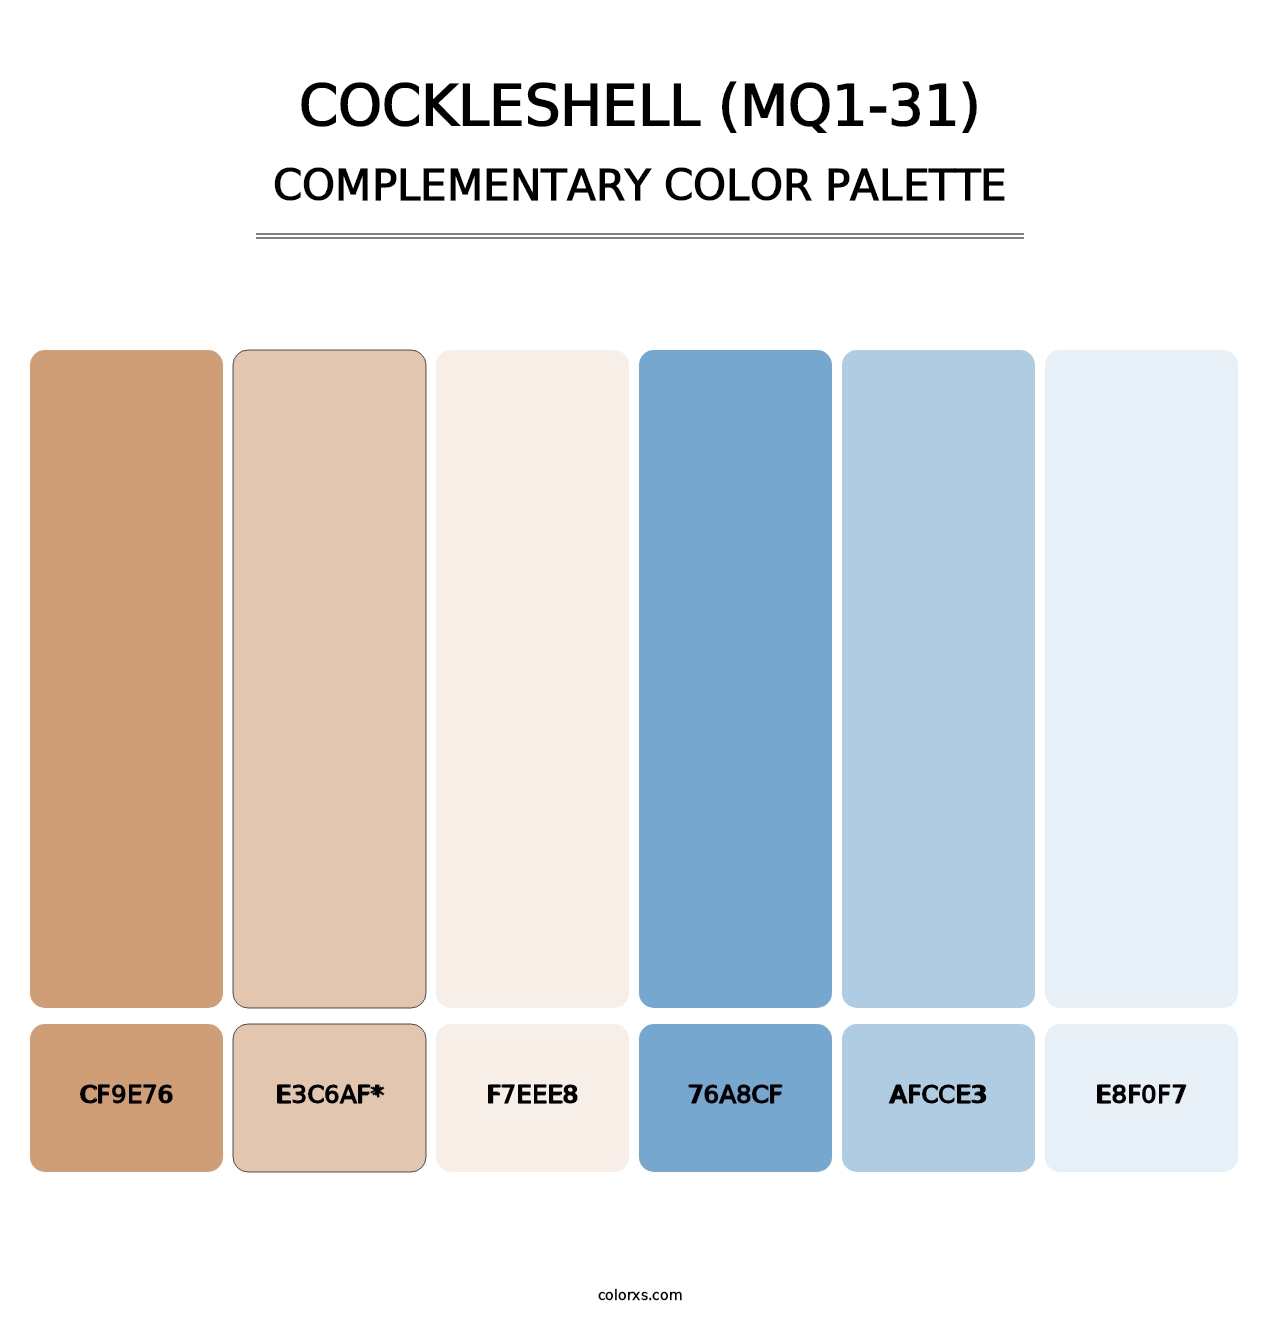 Cockleshell (MQ1-31) - Complementary Color Palette